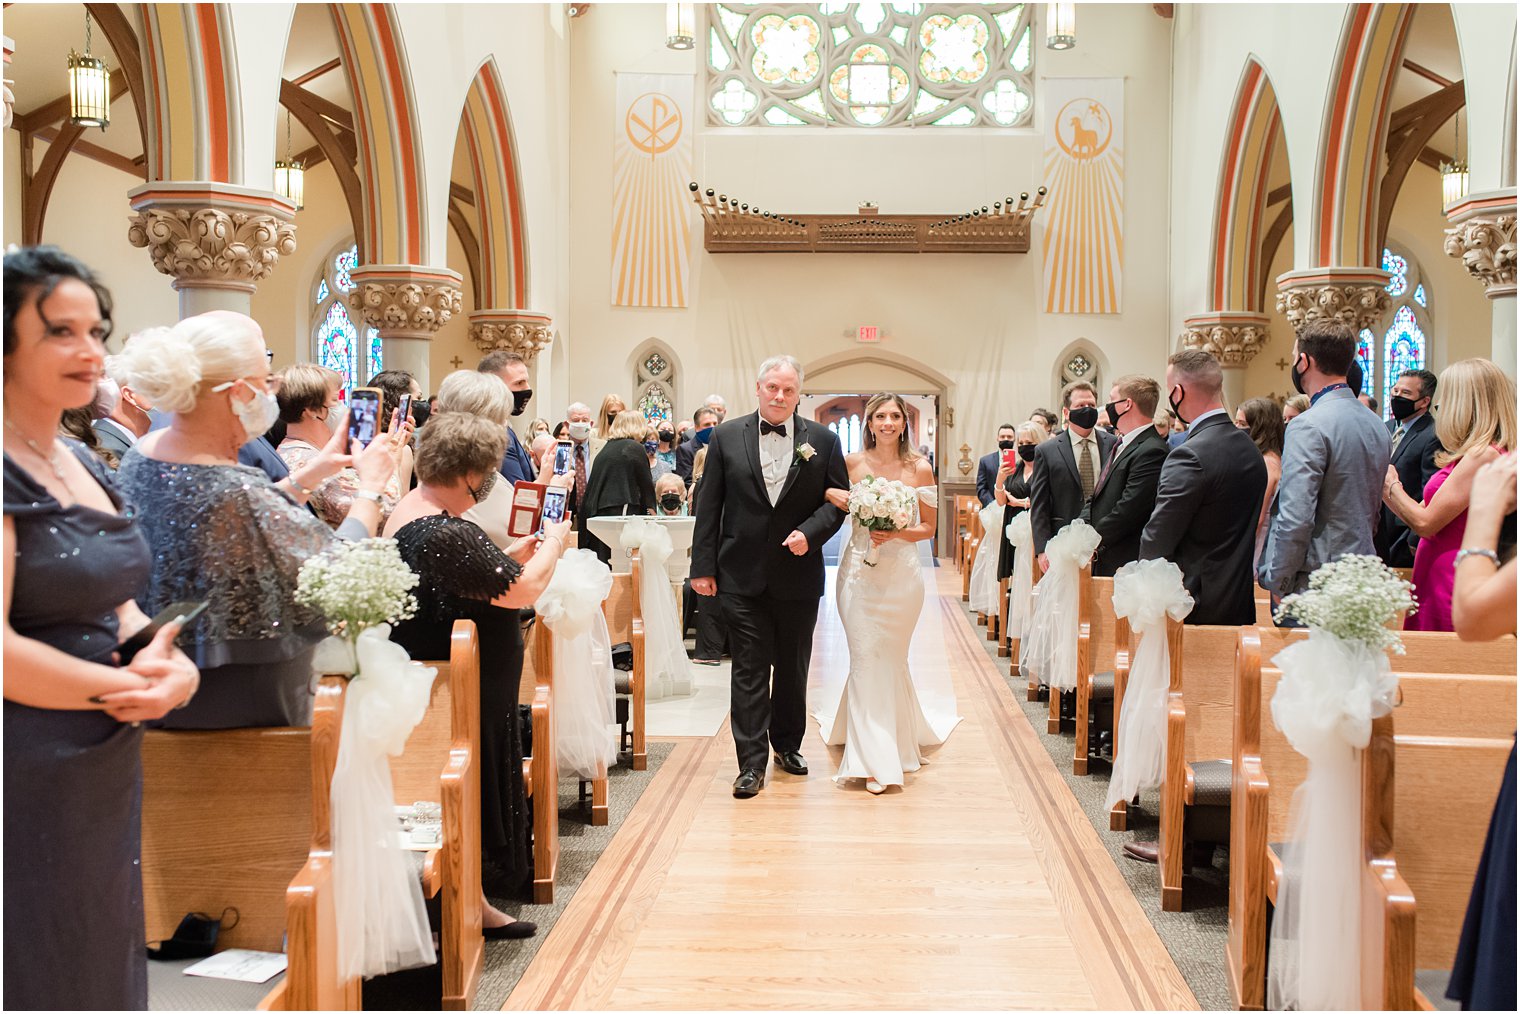 bride enters wedding ceremony during traditional Catholic Church wedding in New Jersey